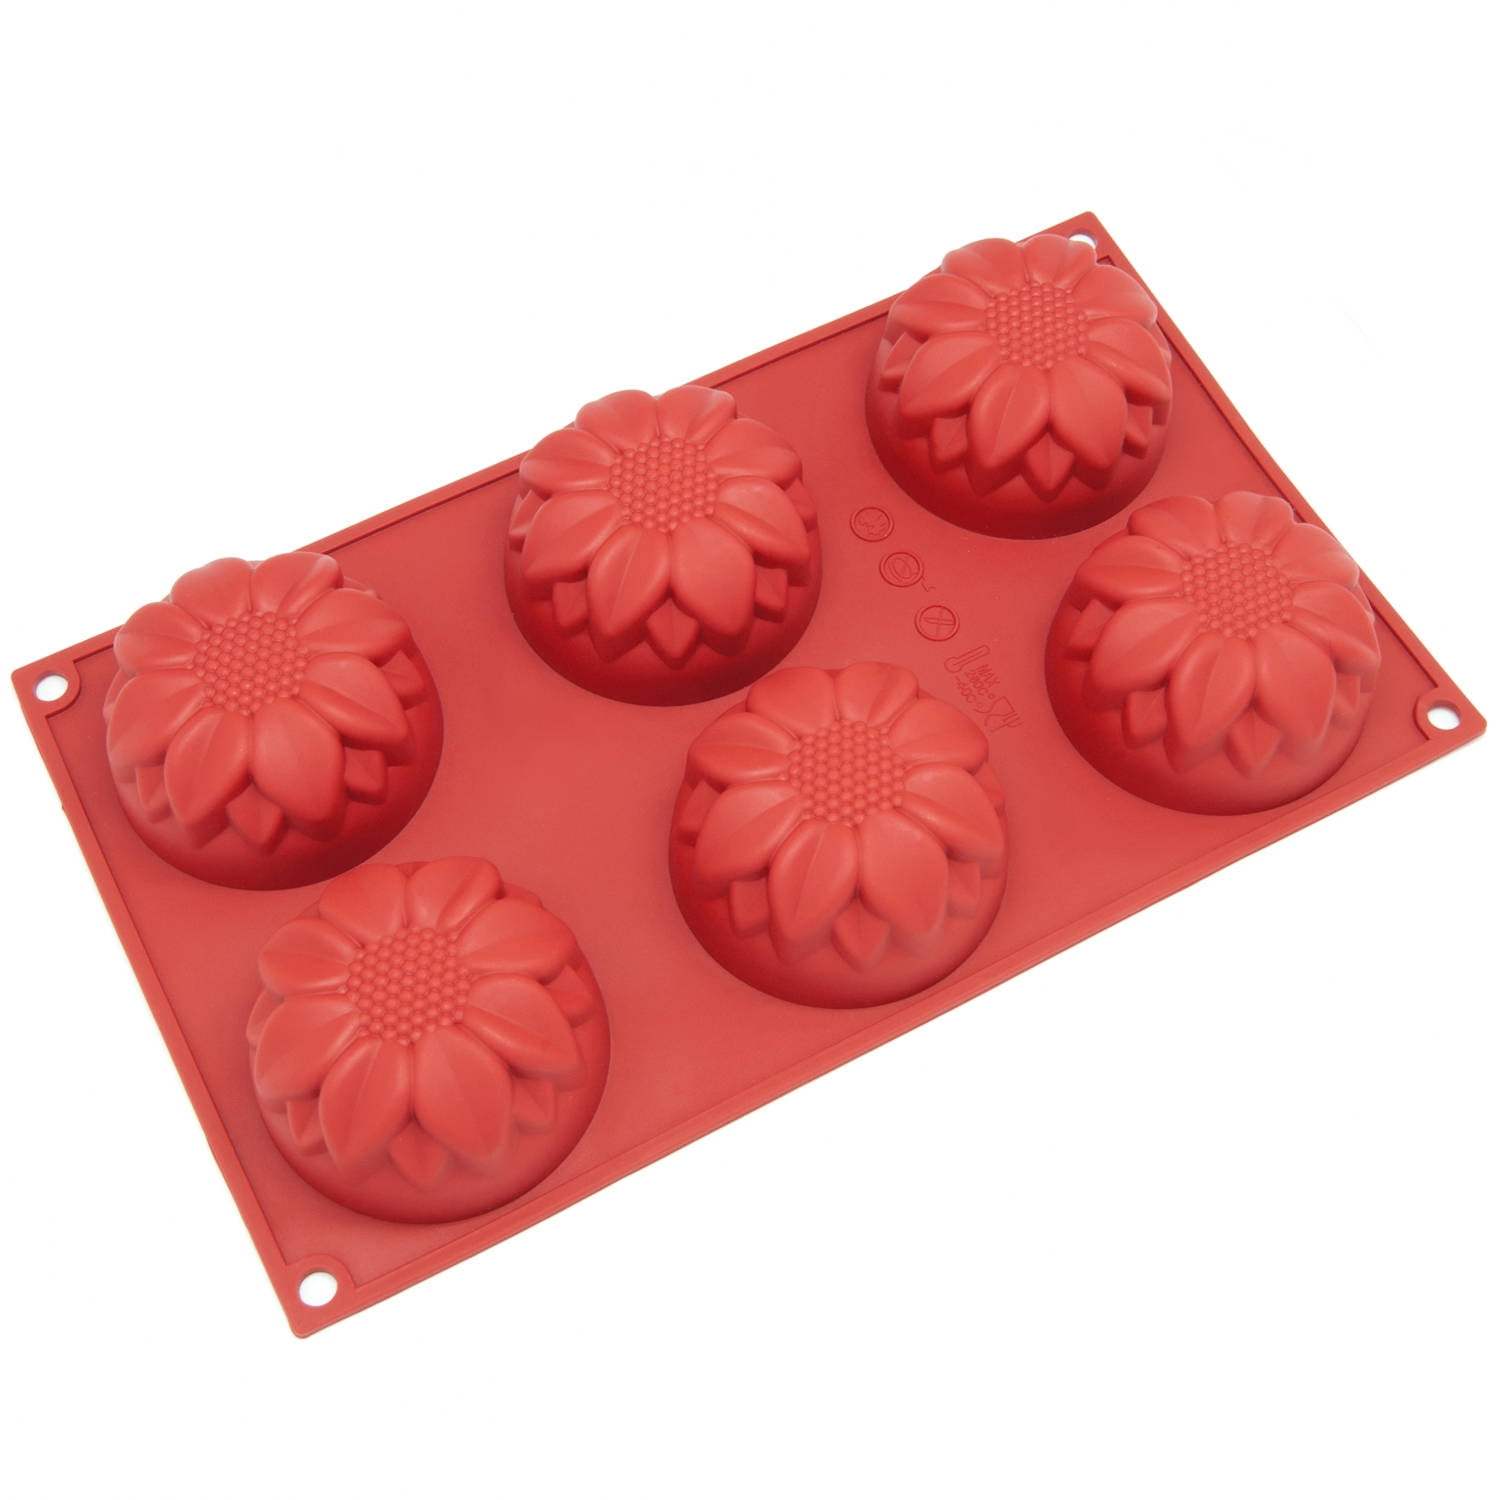 Sunflower Silicone Mold Chocolate Cake Baking Pan Soap Kitchen Cooking Tools D 